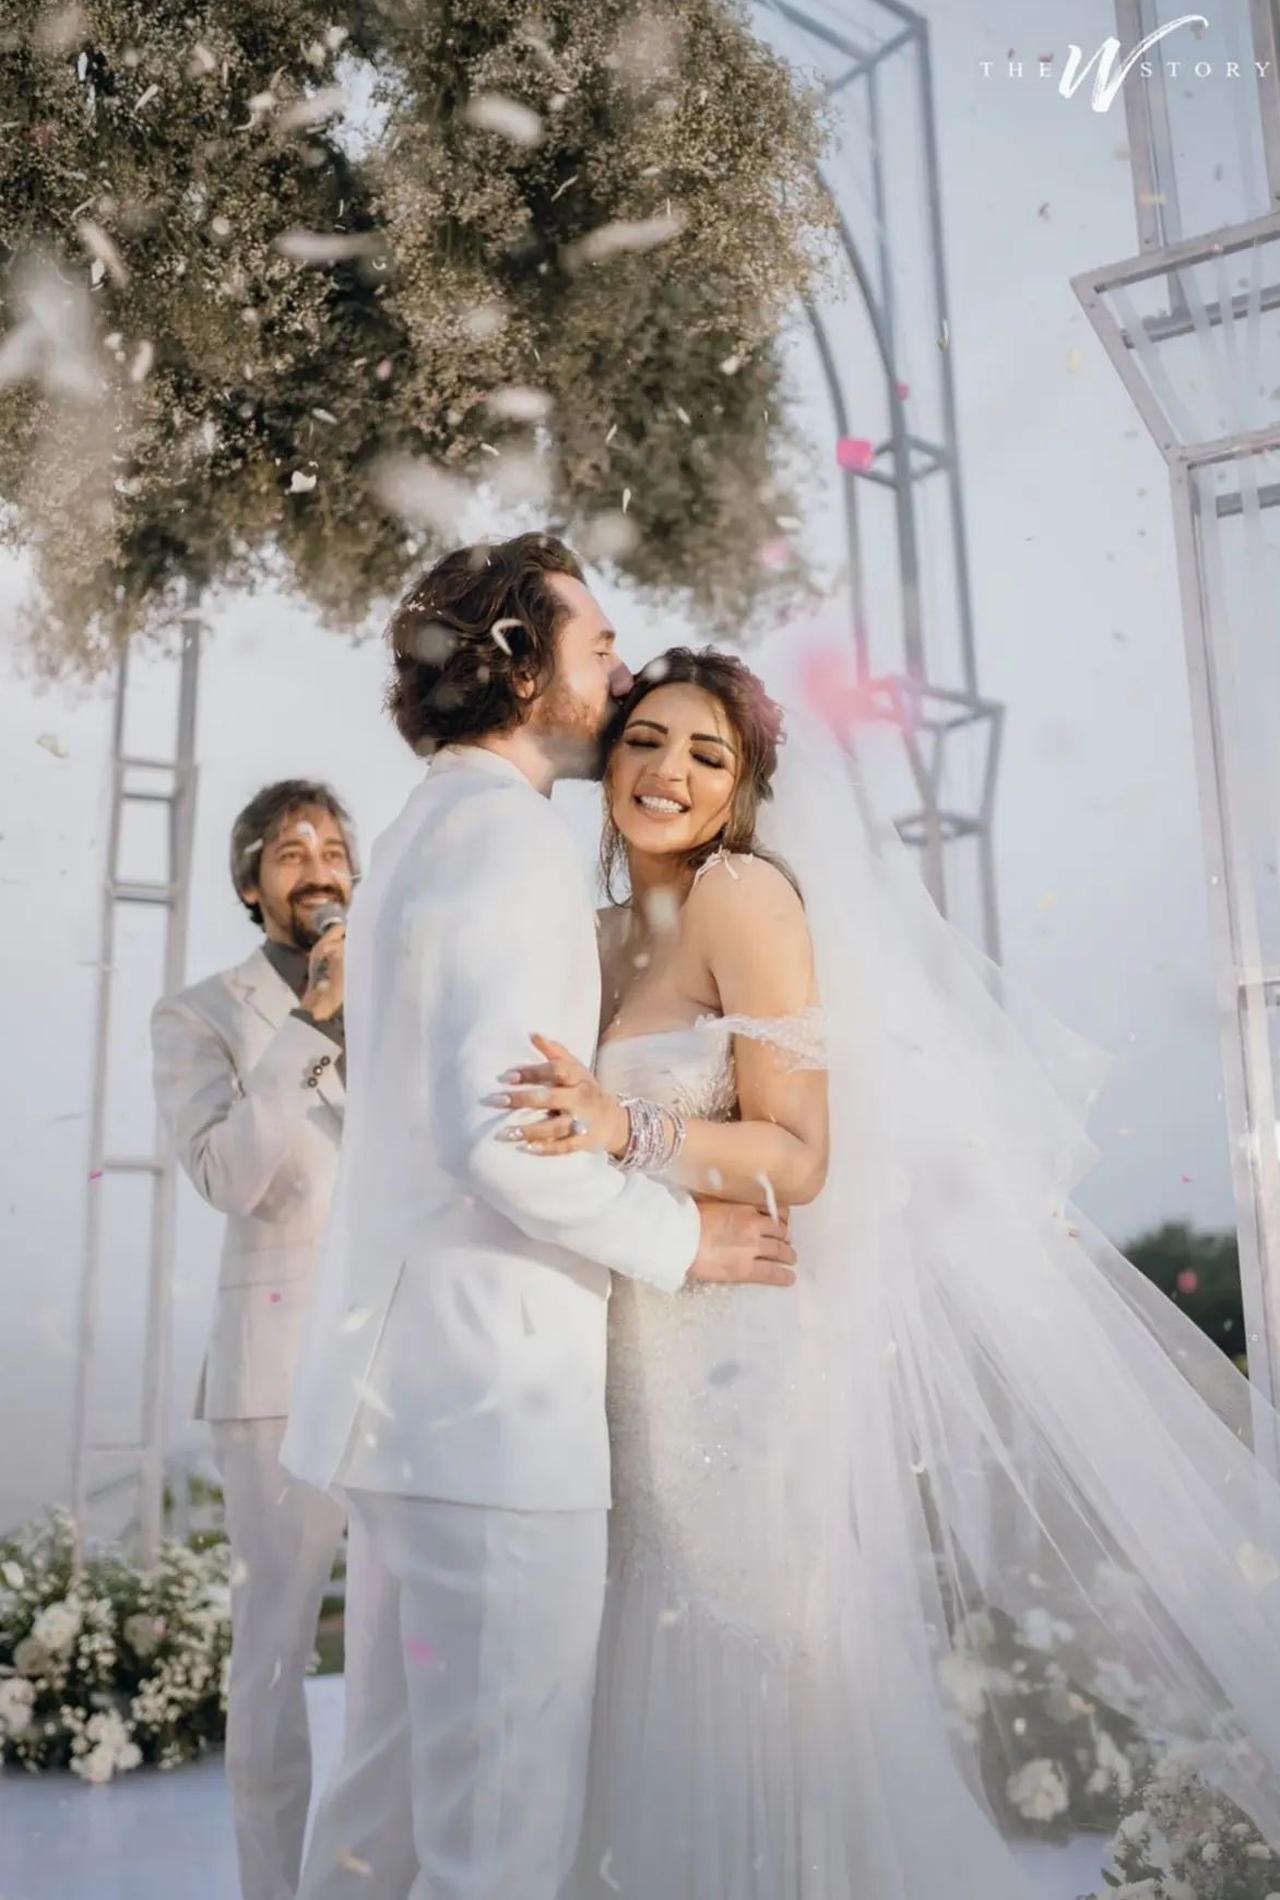 Shama Sikander even shared the first pictures from her white wedding on Instagram, and by the looks of it, the actress did make a happy bride.